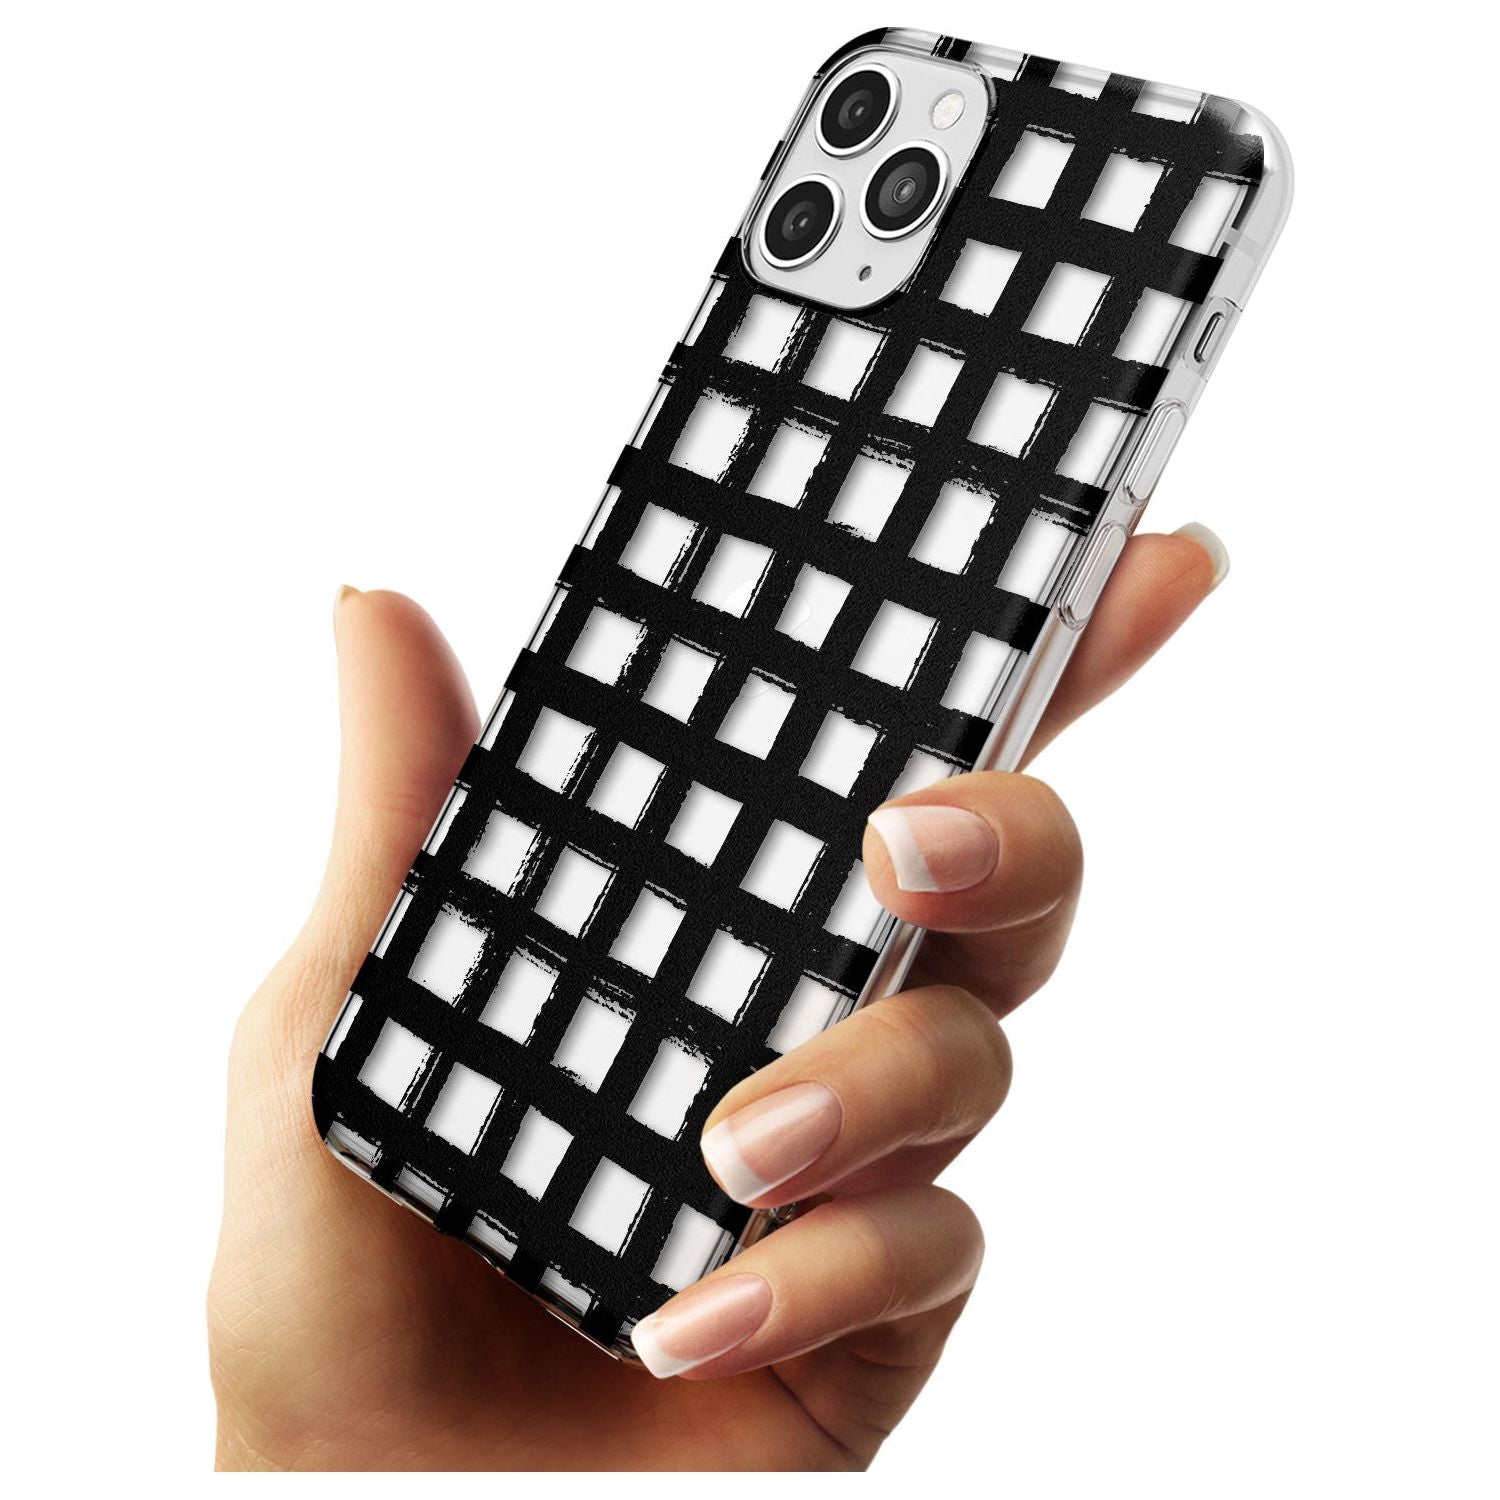 Messy Black Grid - Clear Black Impact Phone Case for iPhone 11 Pro Max